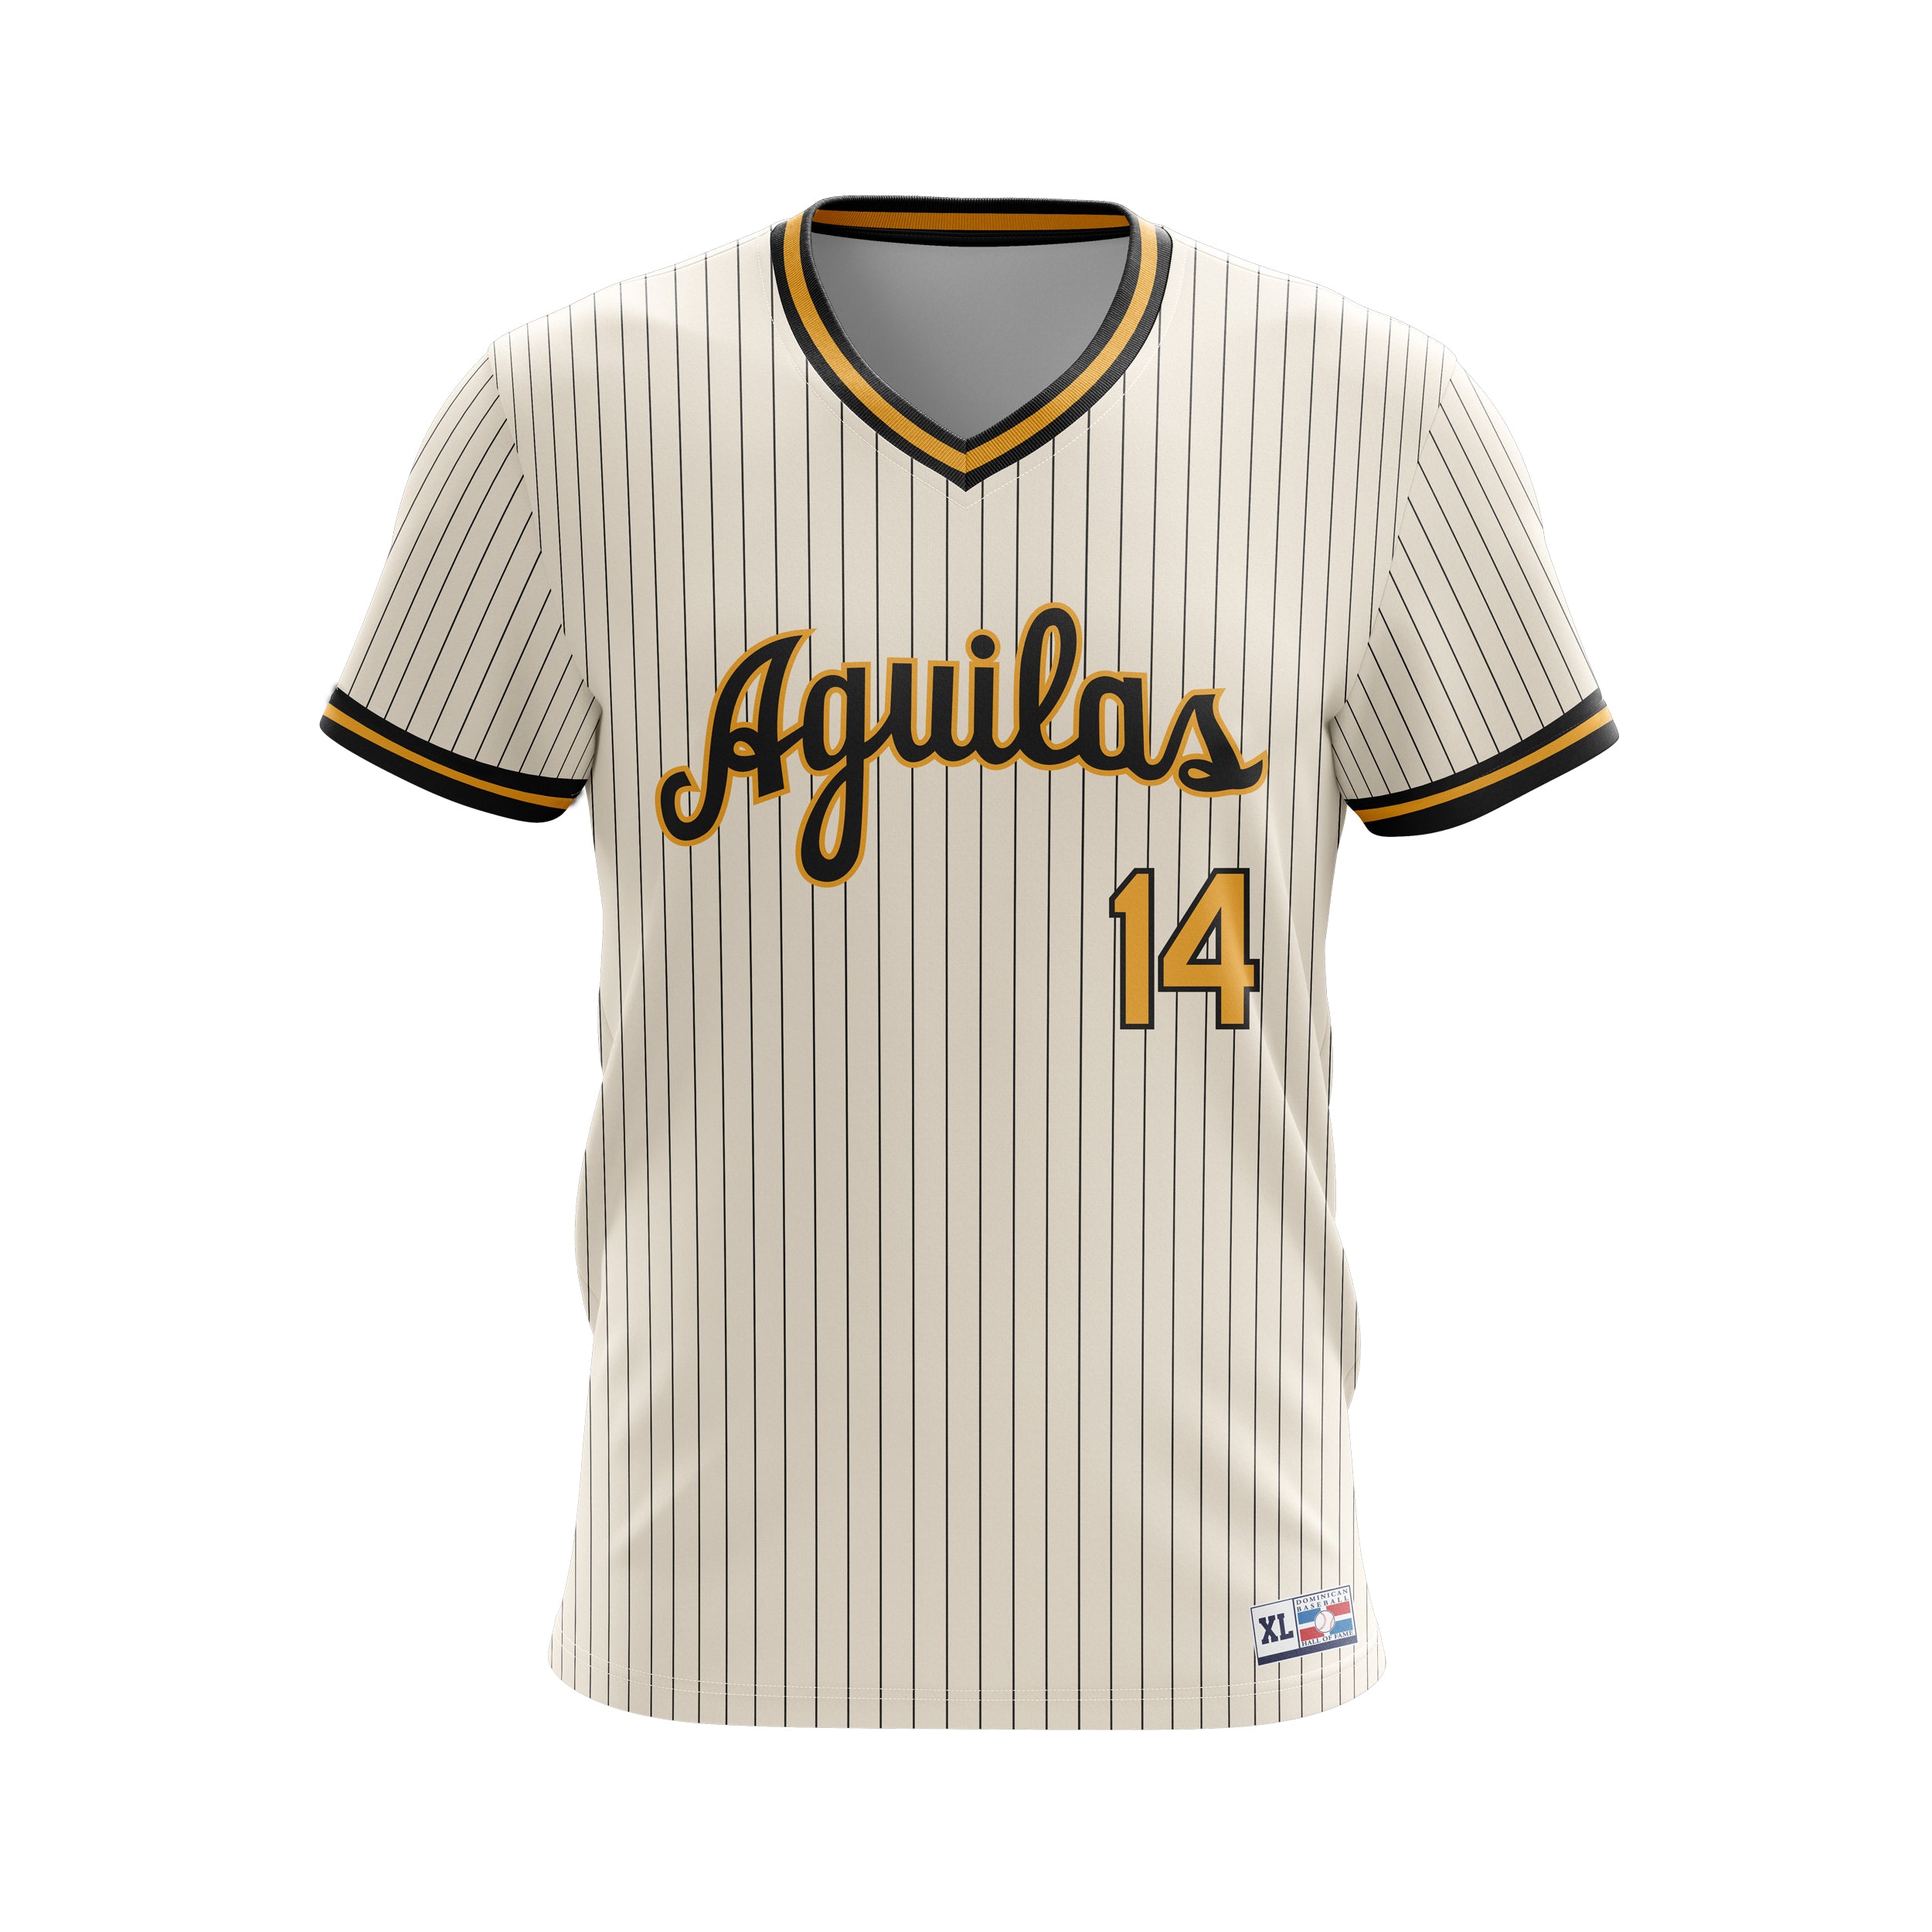 Dominican Baseball Team - Aguilas - Hall of Fame Jersey 